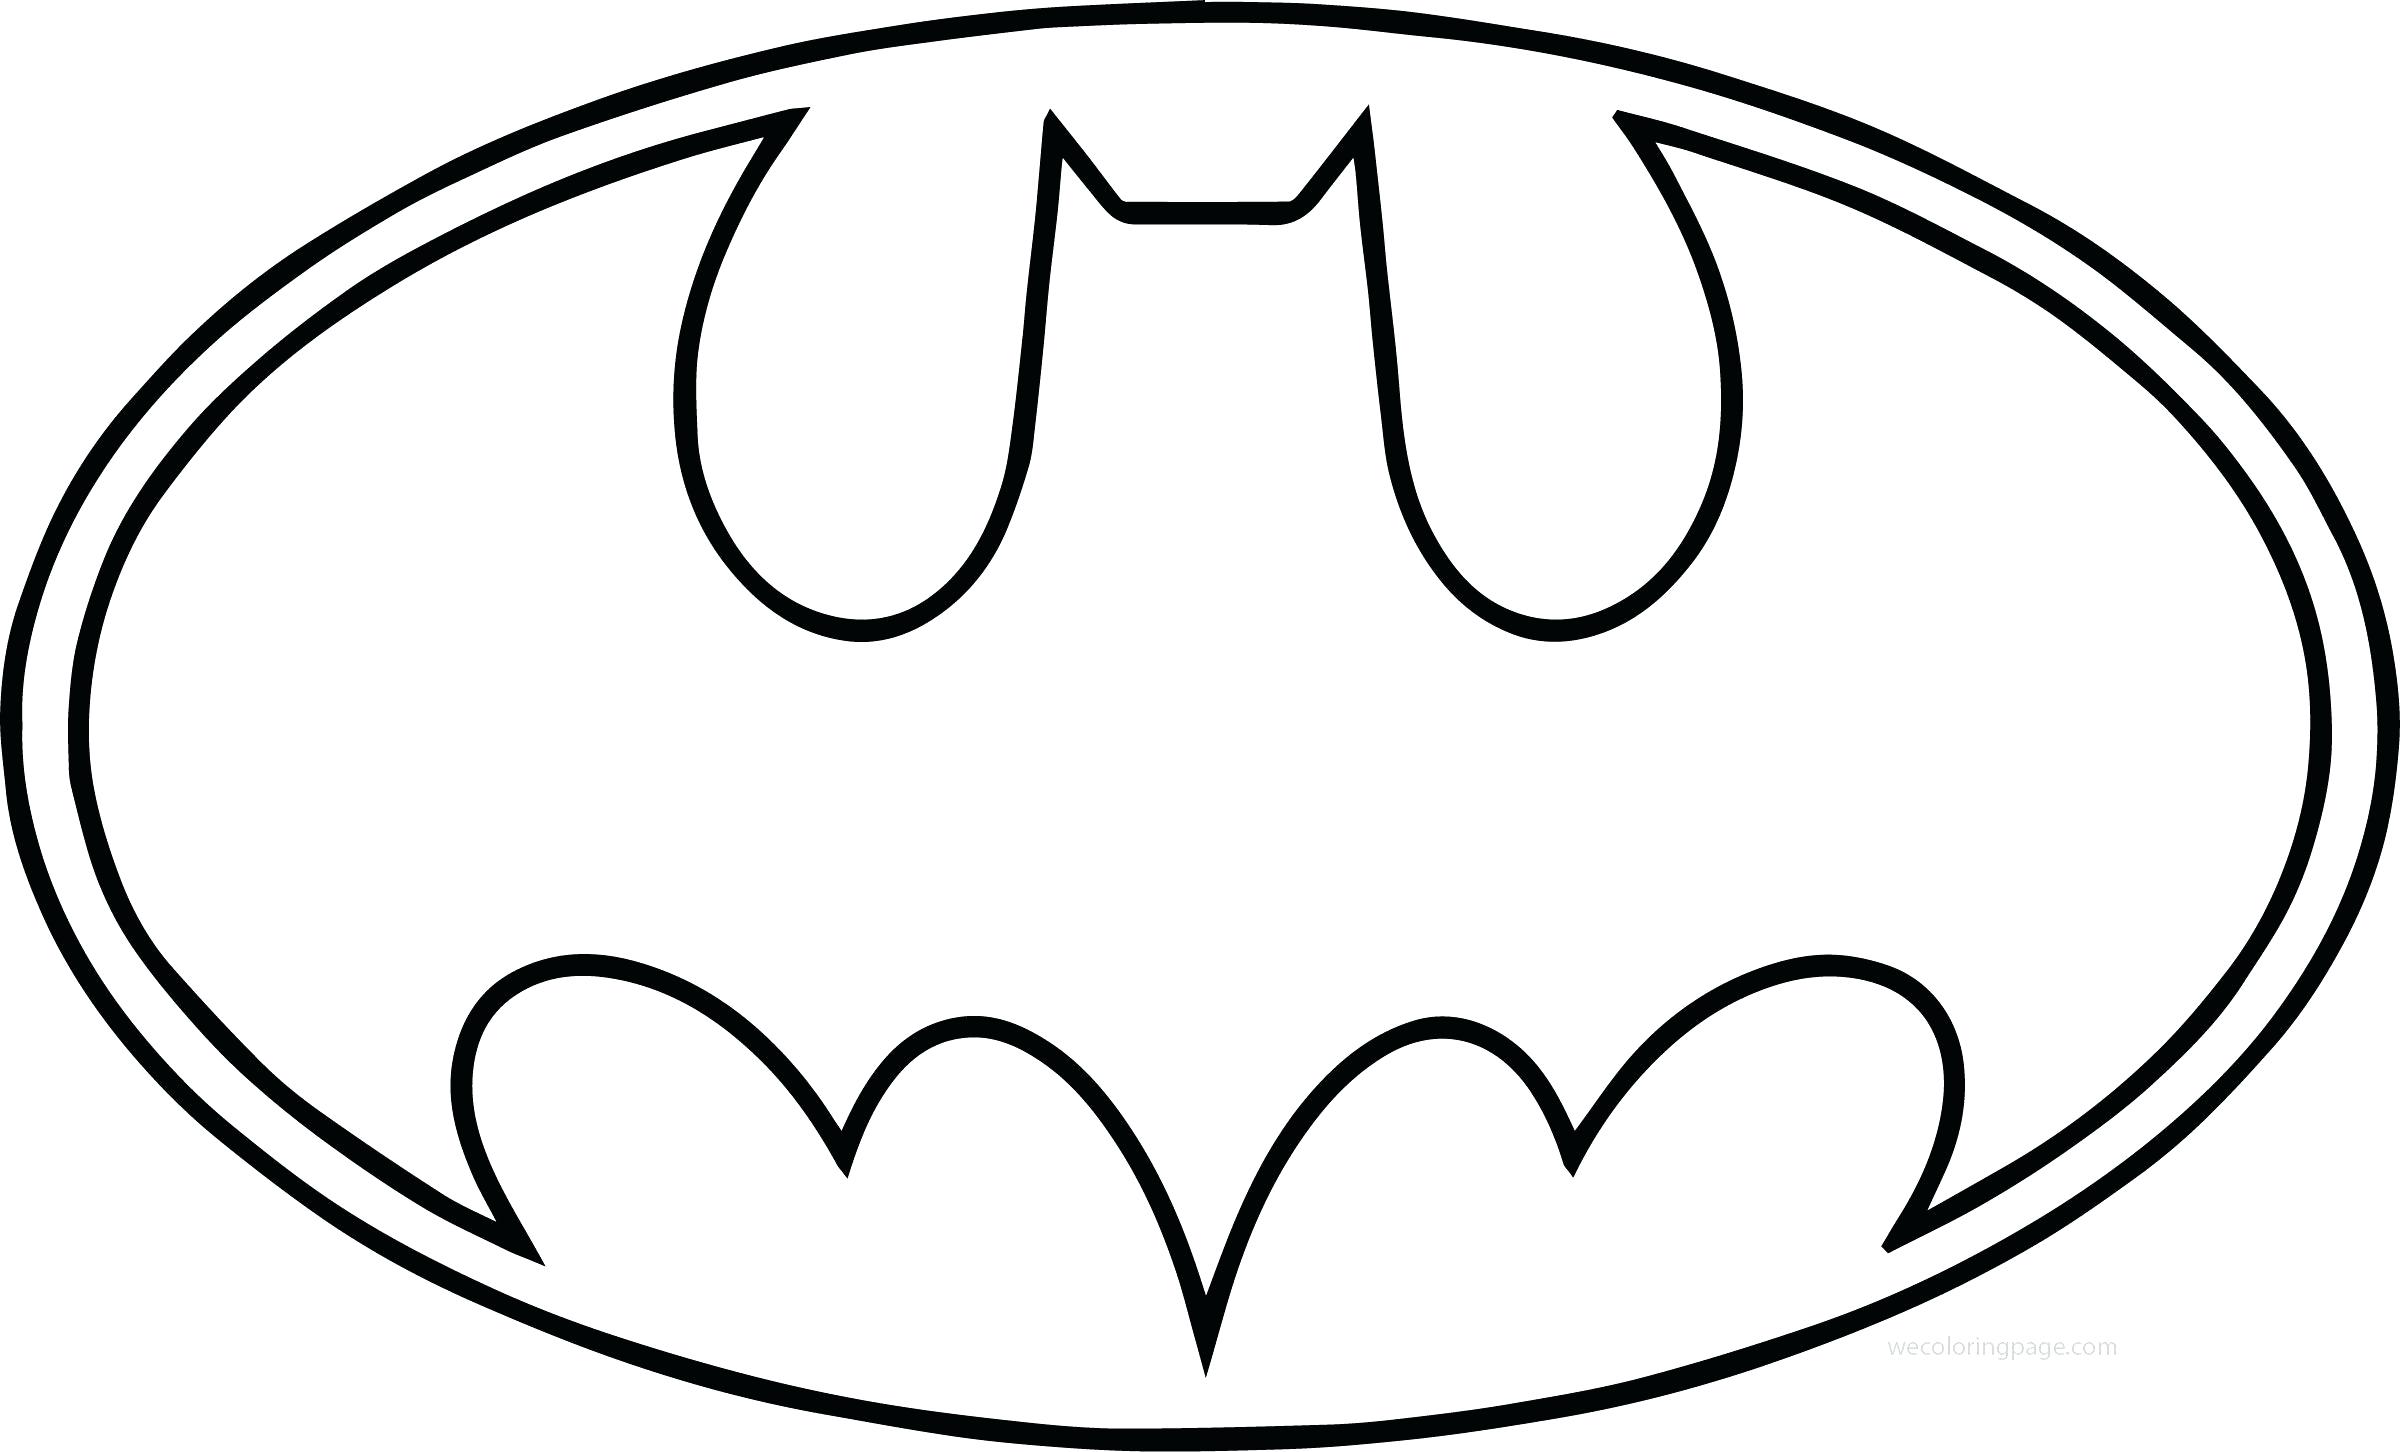 Outline Of Batman | Free download on ClipArtMag